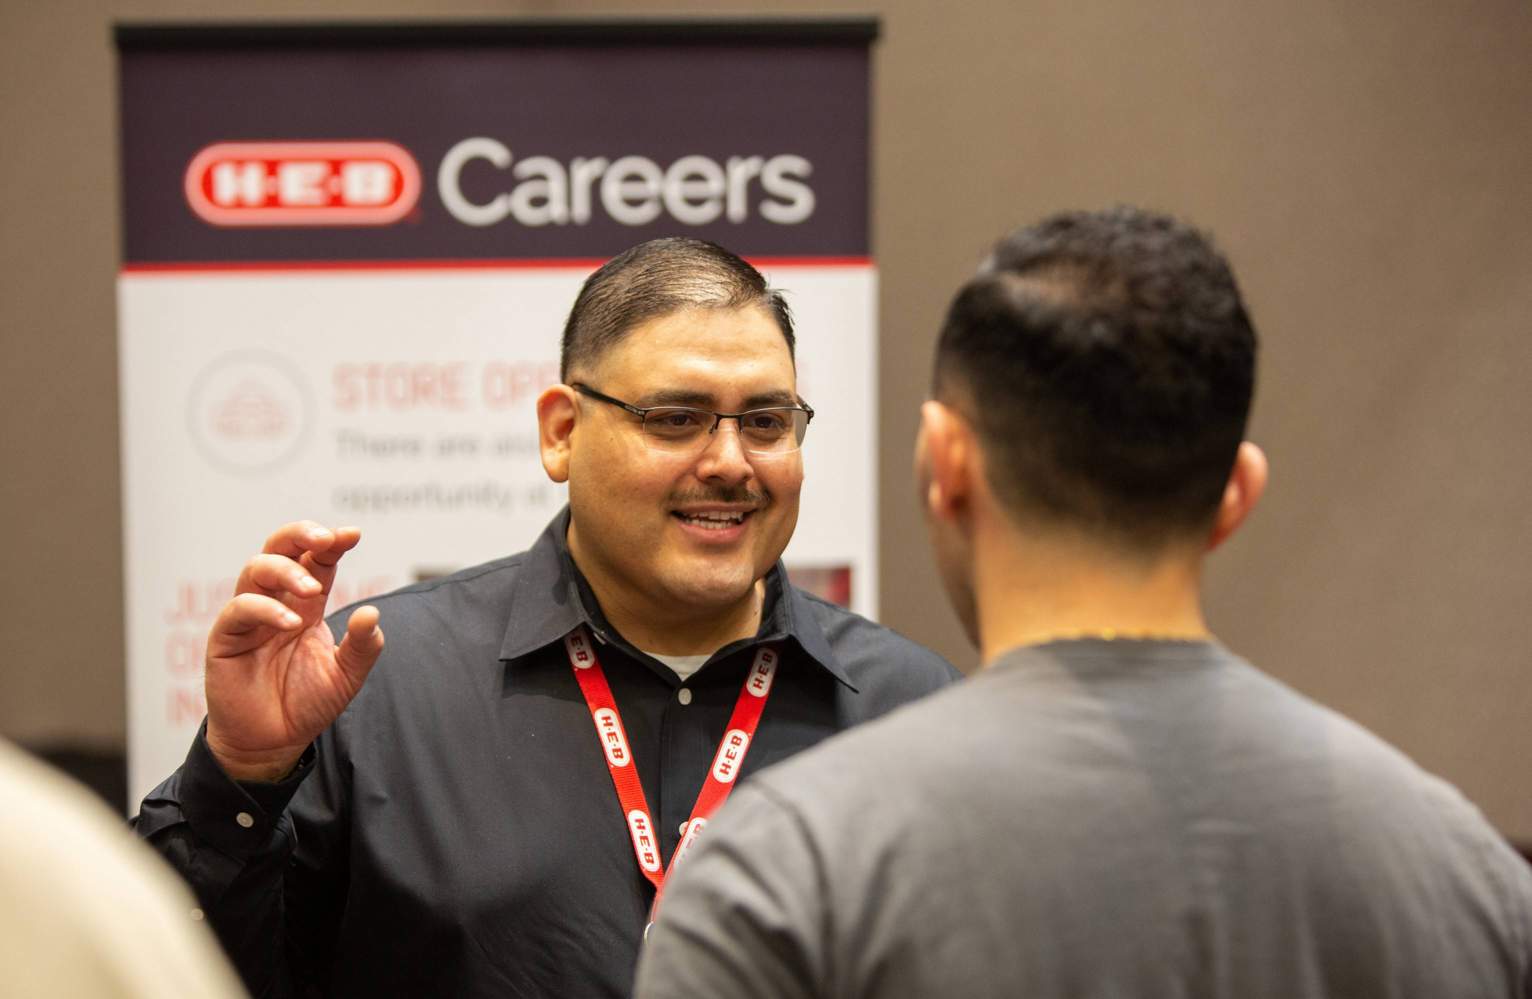 Recruiter from H-E-B talking to student at career fair